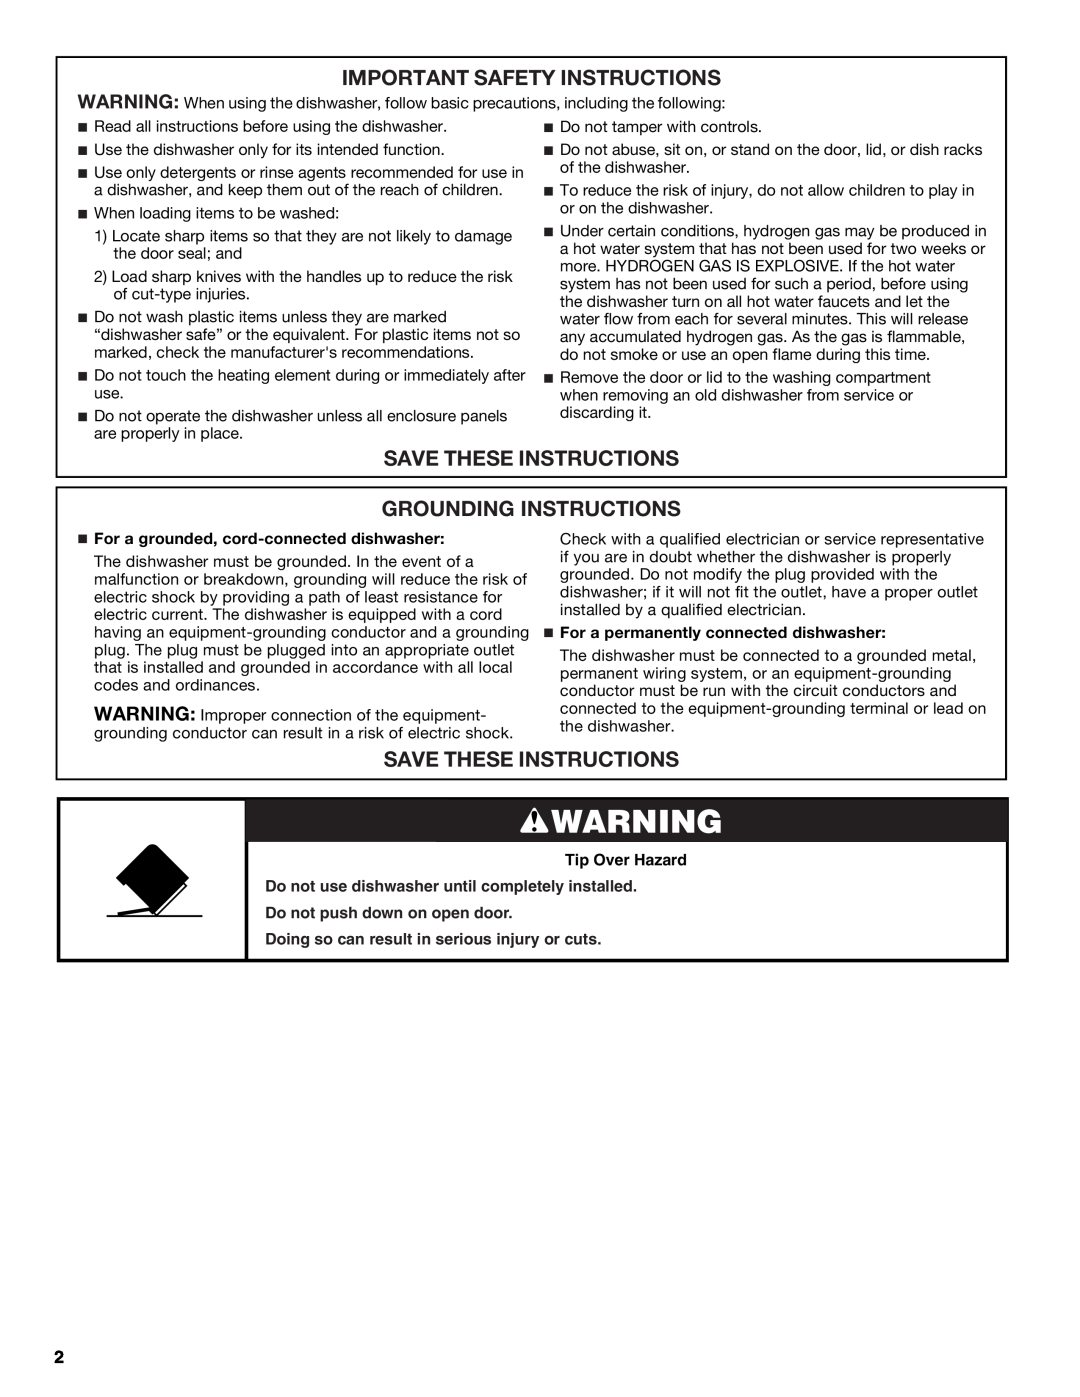 Whirlpool W10275146A manual Important Safety Instructions, Save These Instructions Grounding Instructions, Tip Over Hazard 